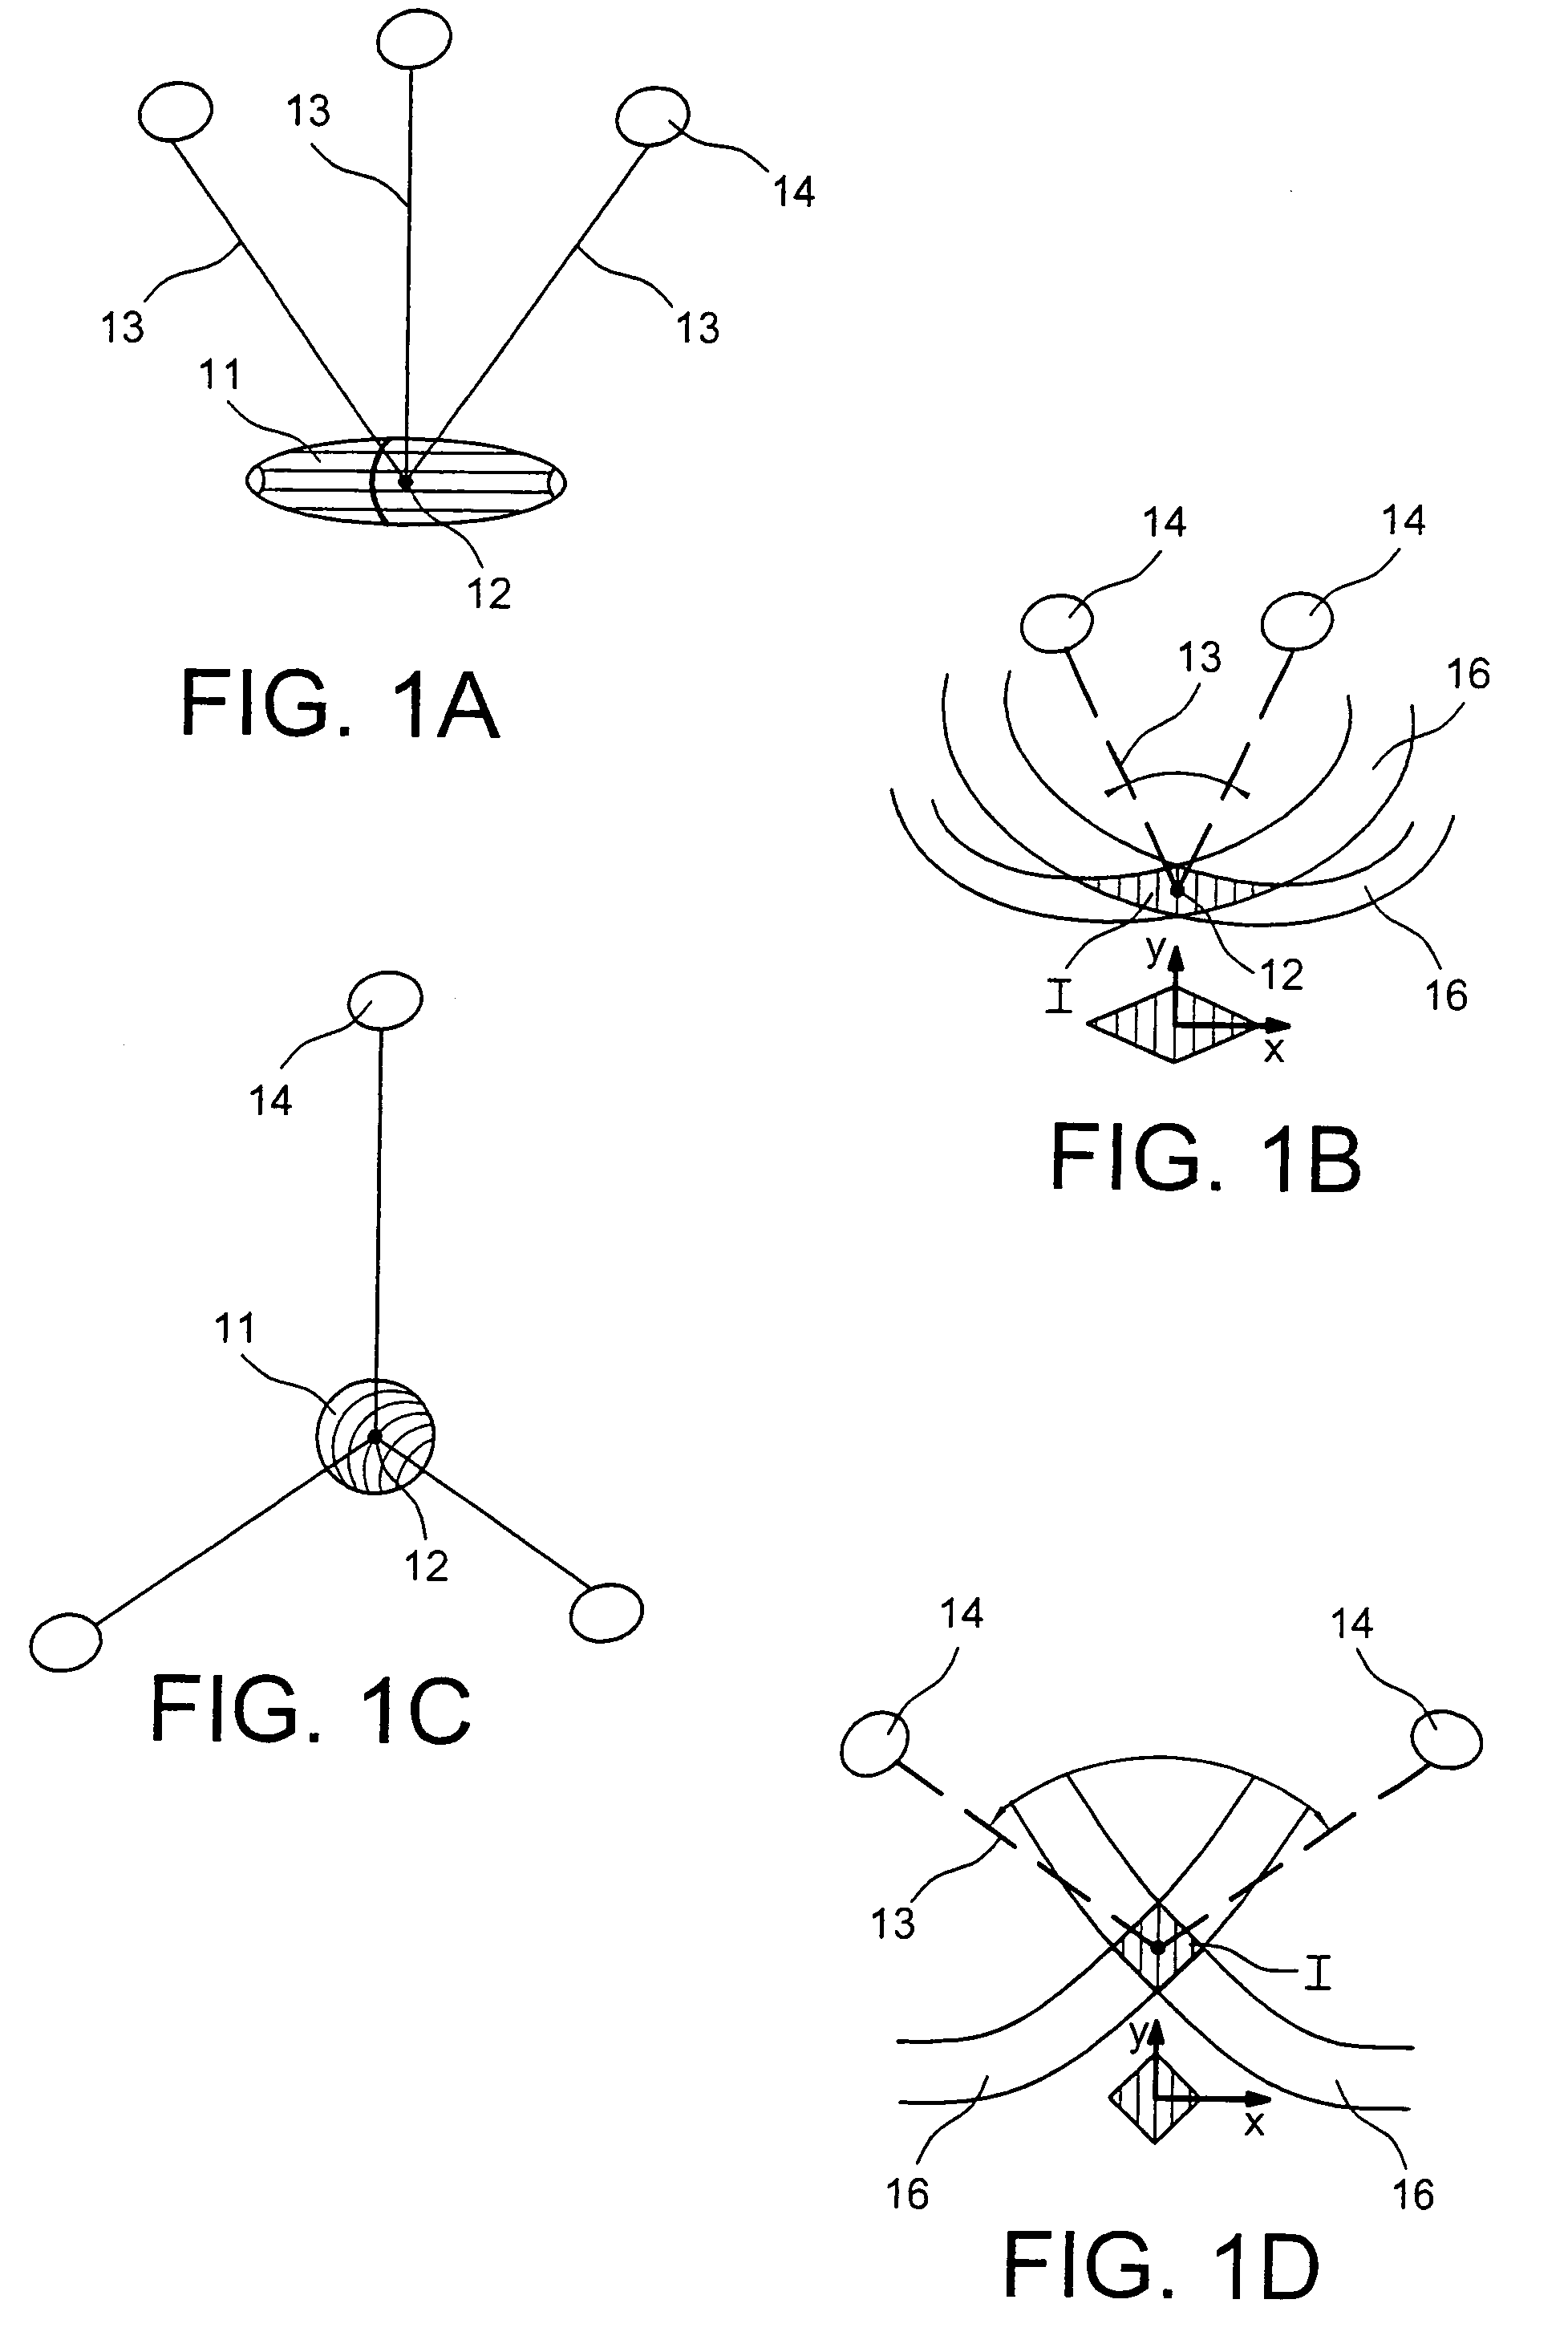 Method of detecting and locating a source of partial discharge in an electrical apparatus